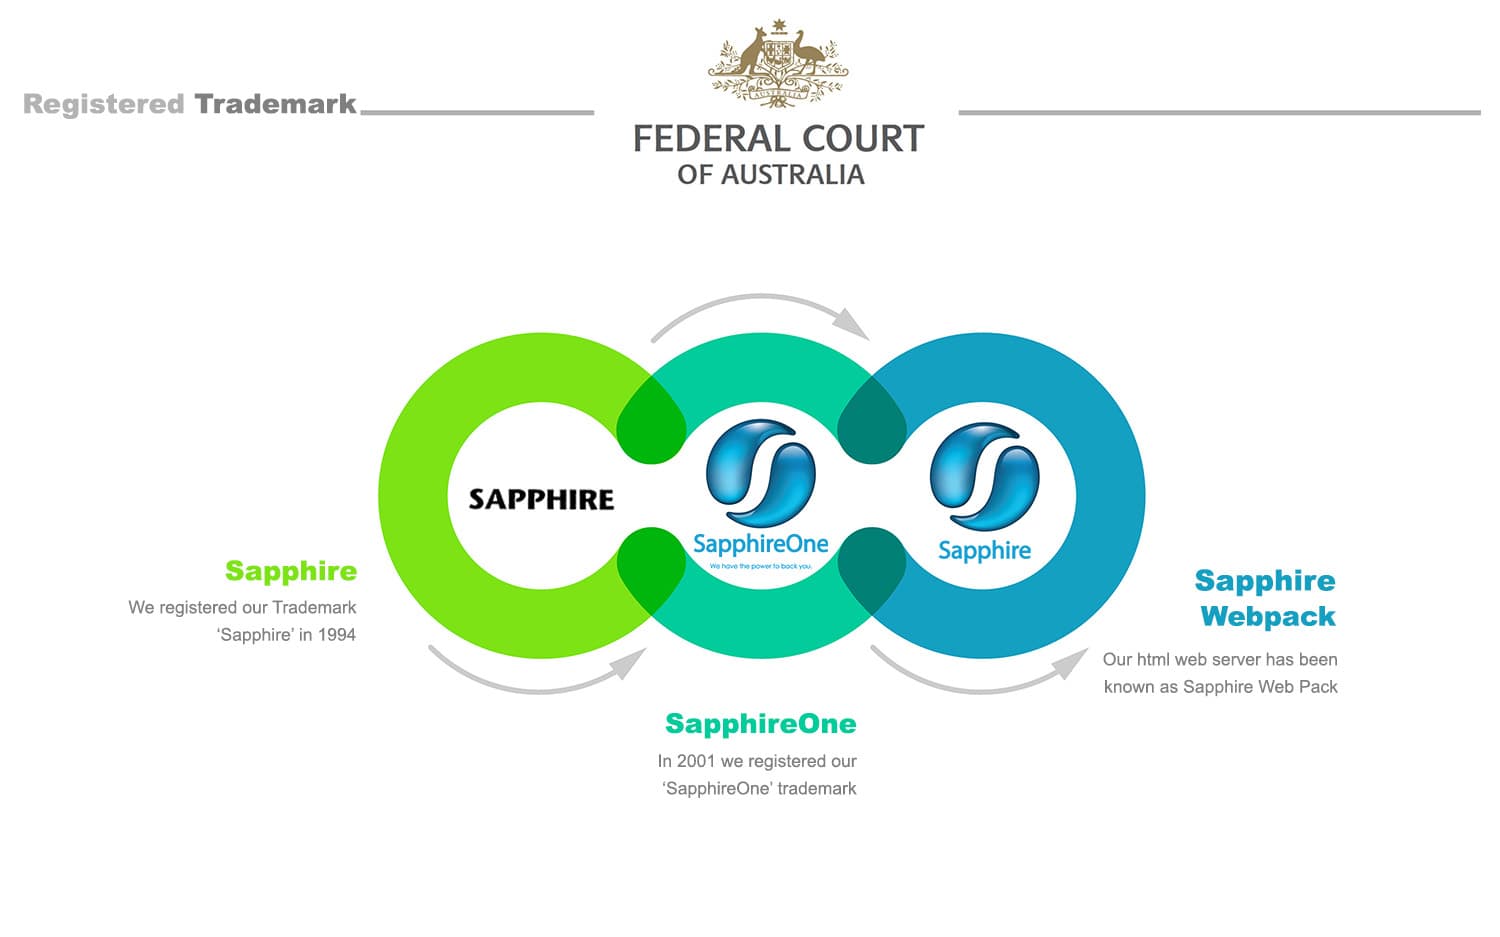 In 2001 we registered our SapphireOne trademark in federal court of australia